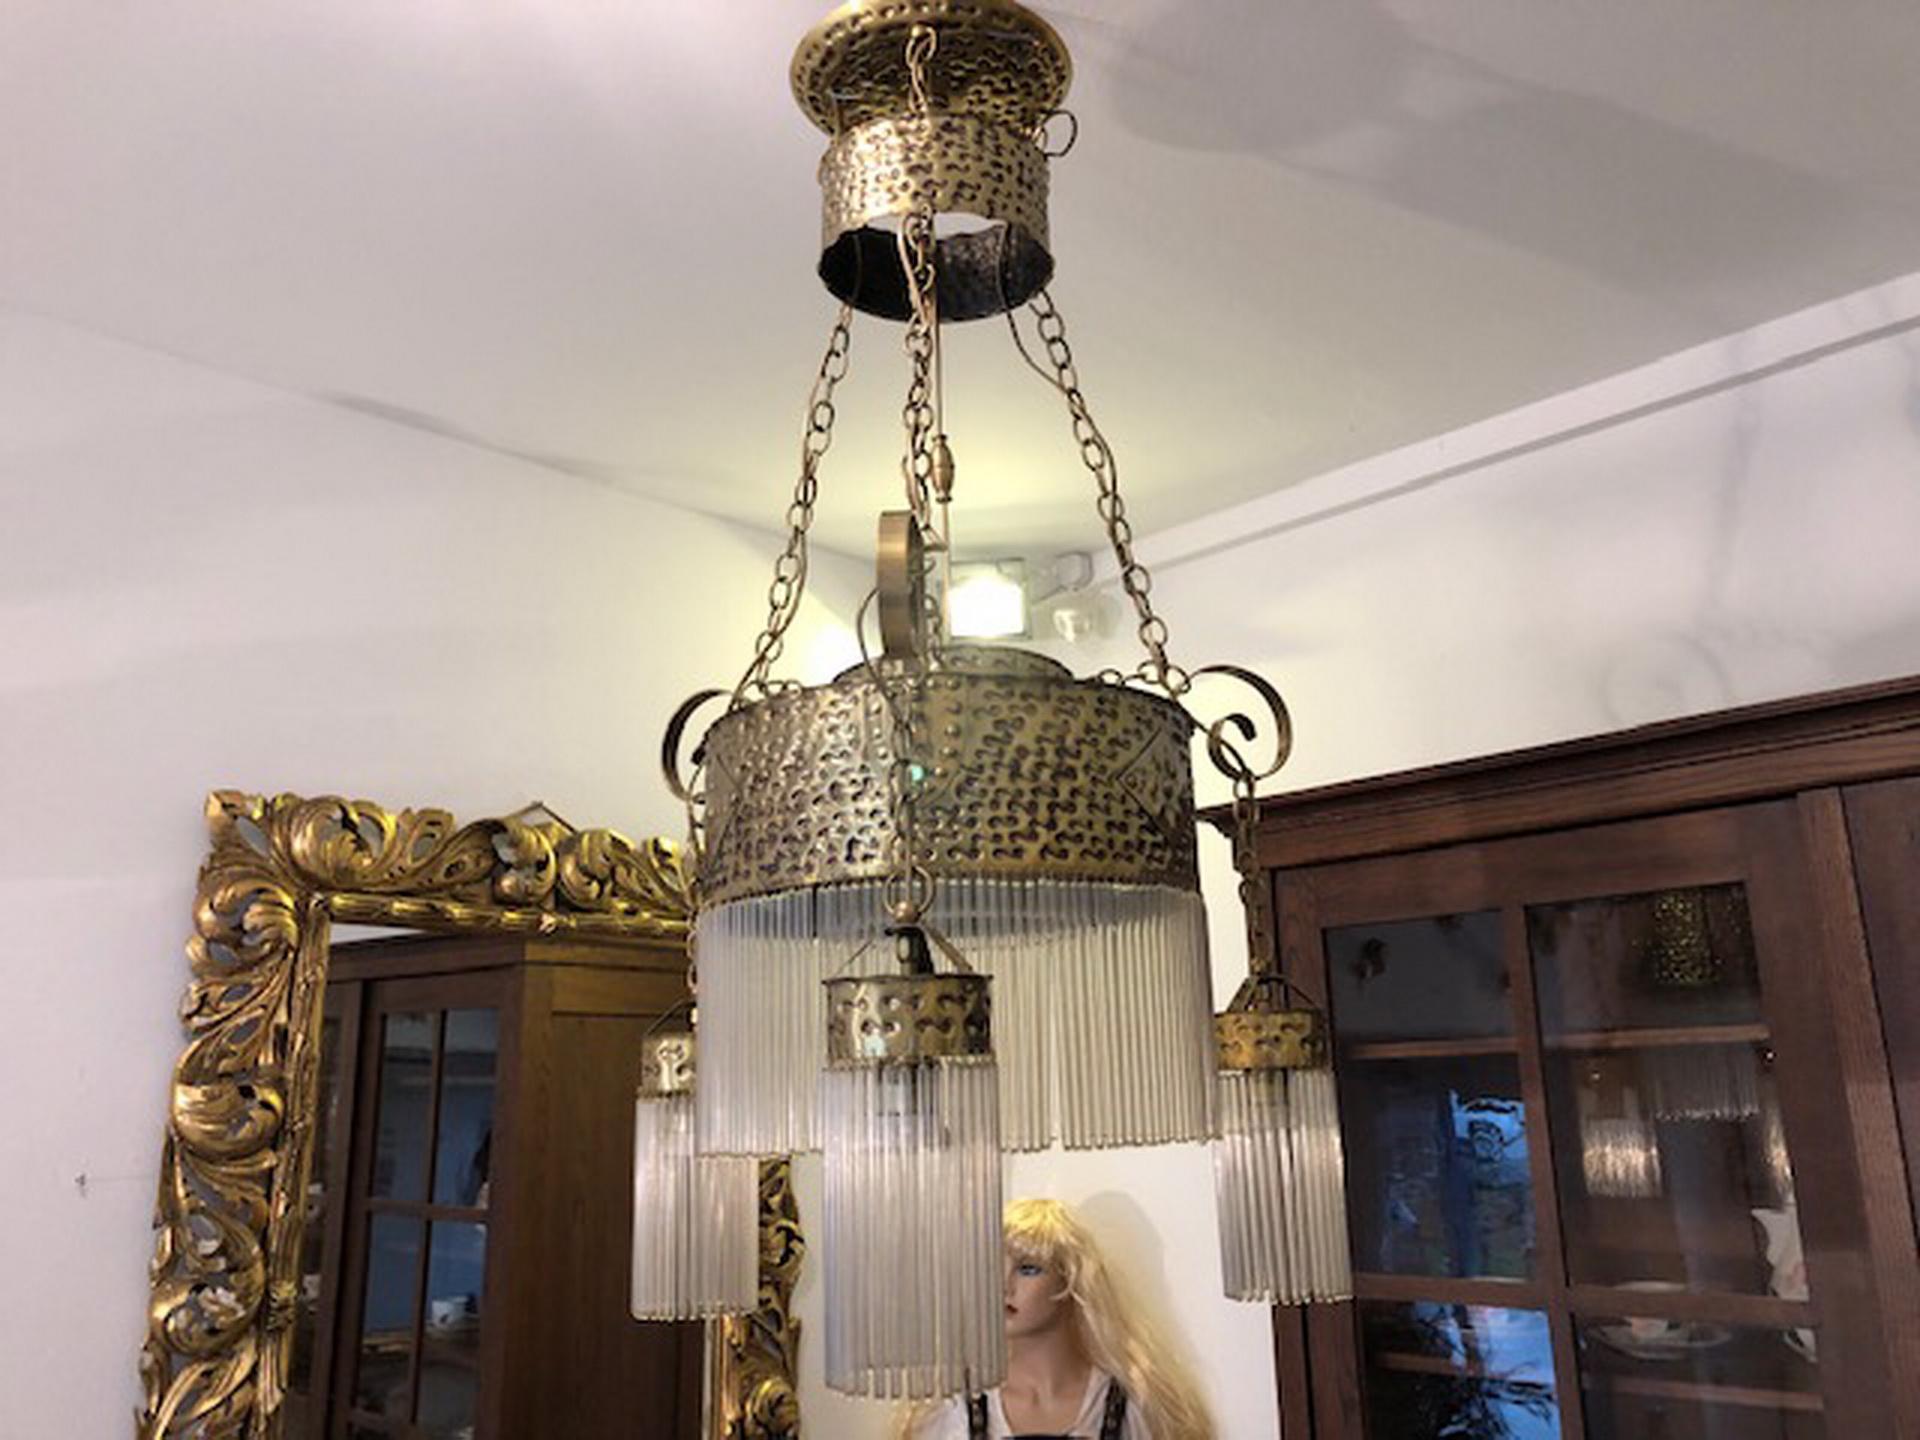 German Original Art Deco Hanging Lamp Chandelier Brass with Glass Rods For Sale